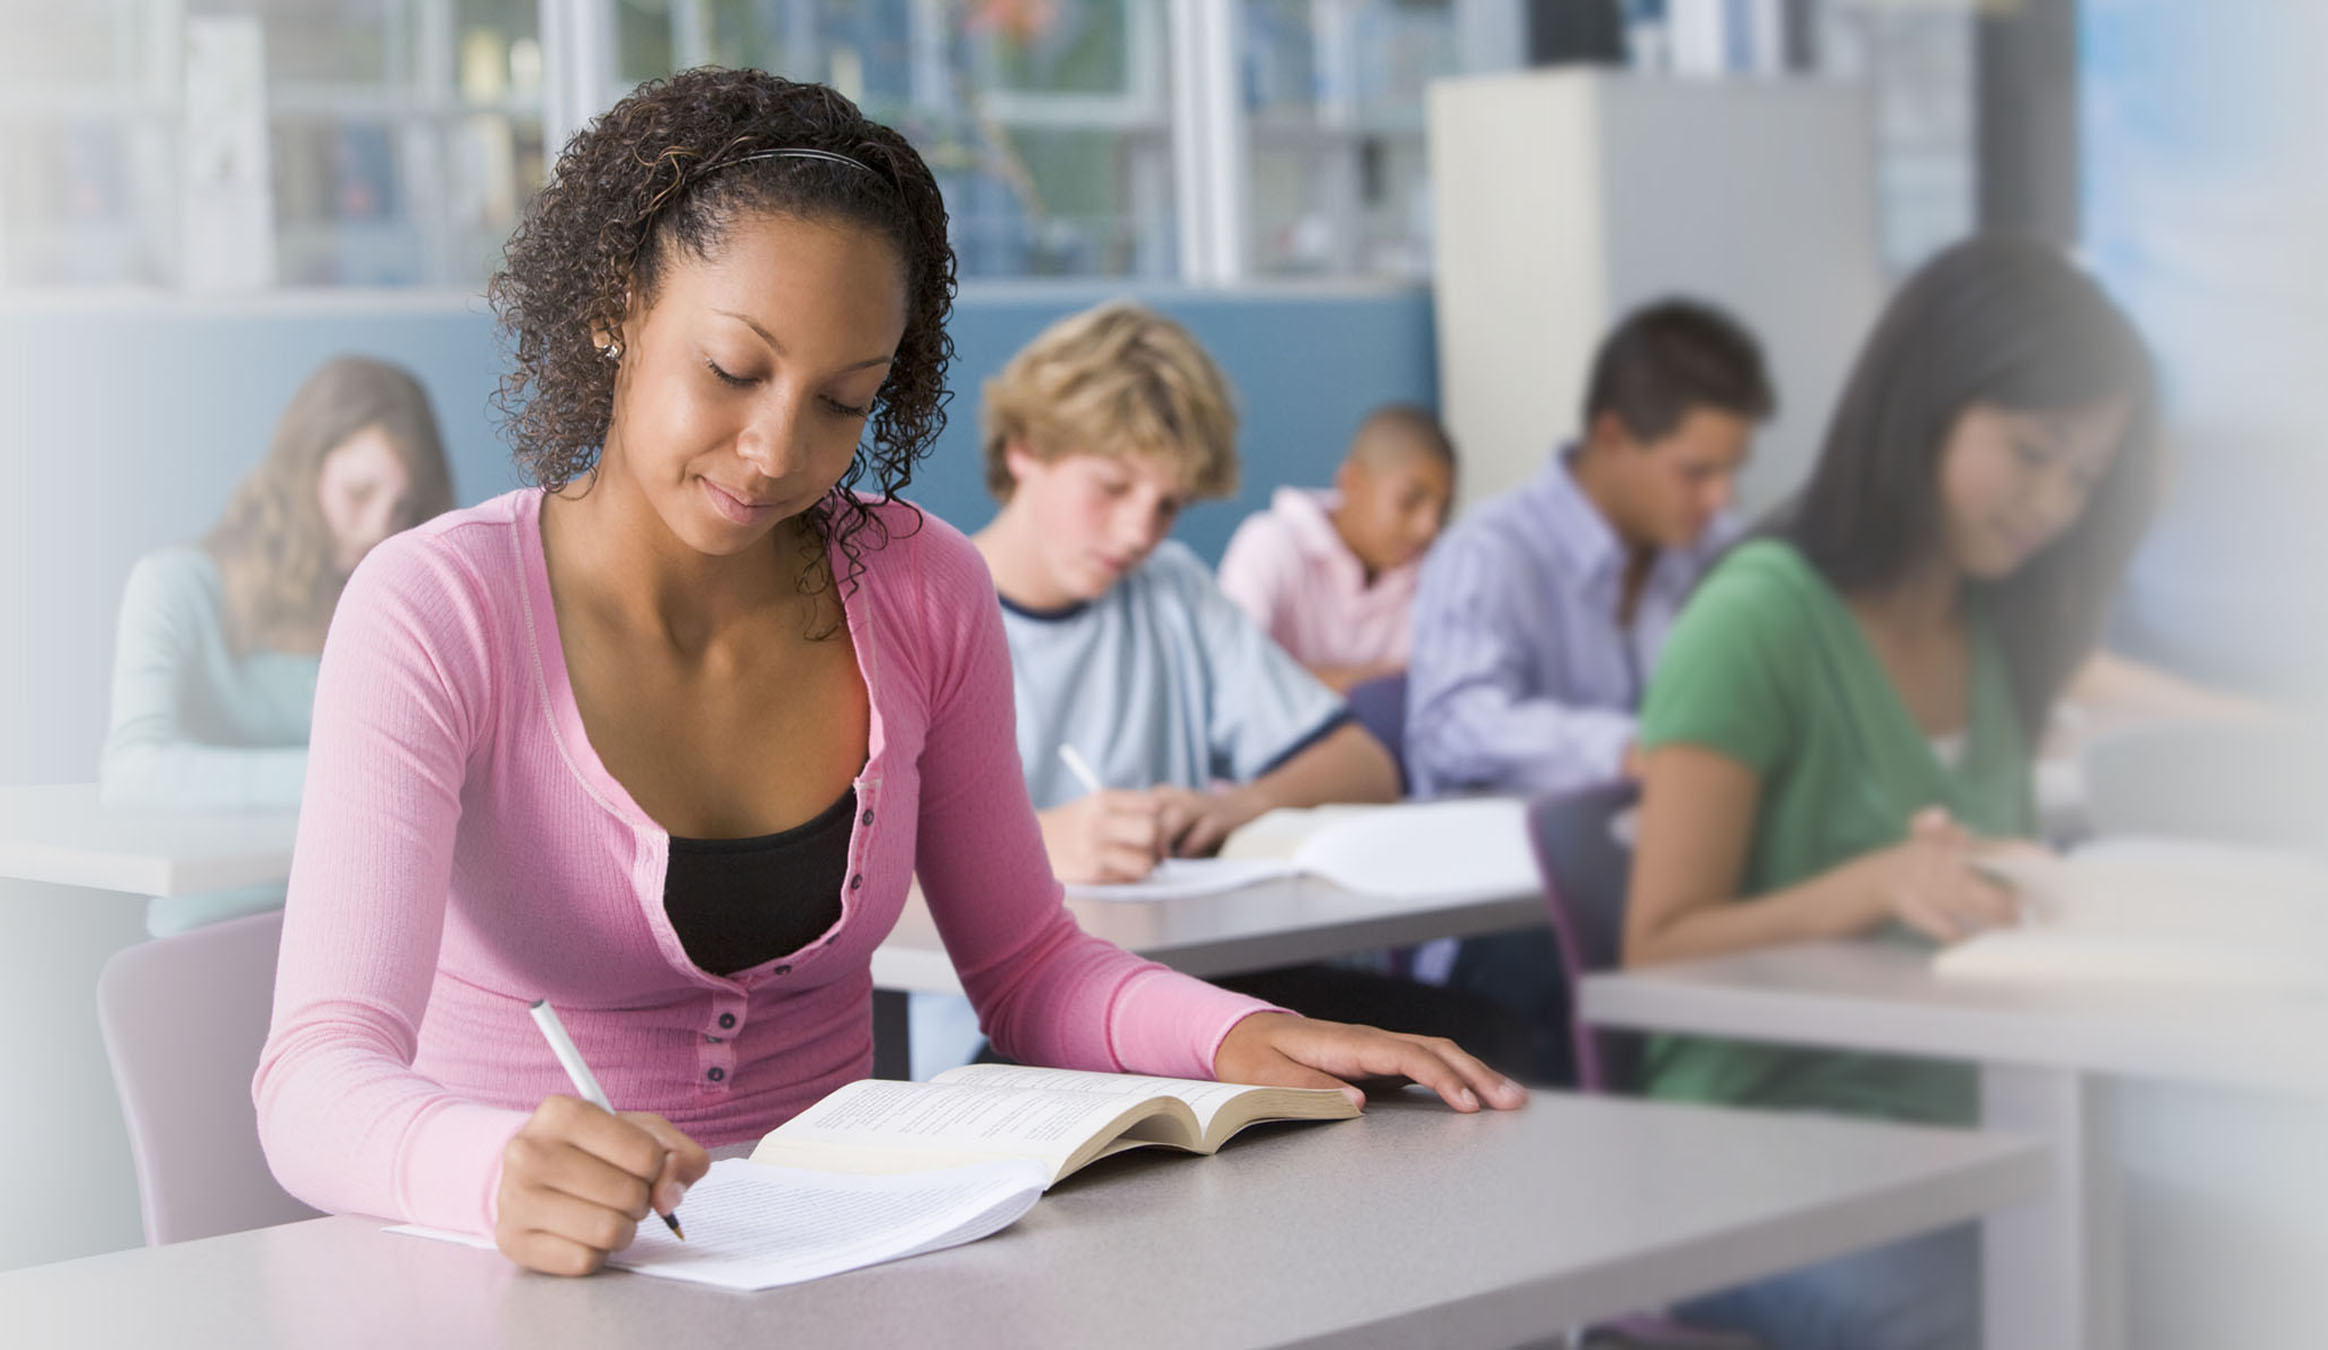 similarities and differences between highschool and college essay